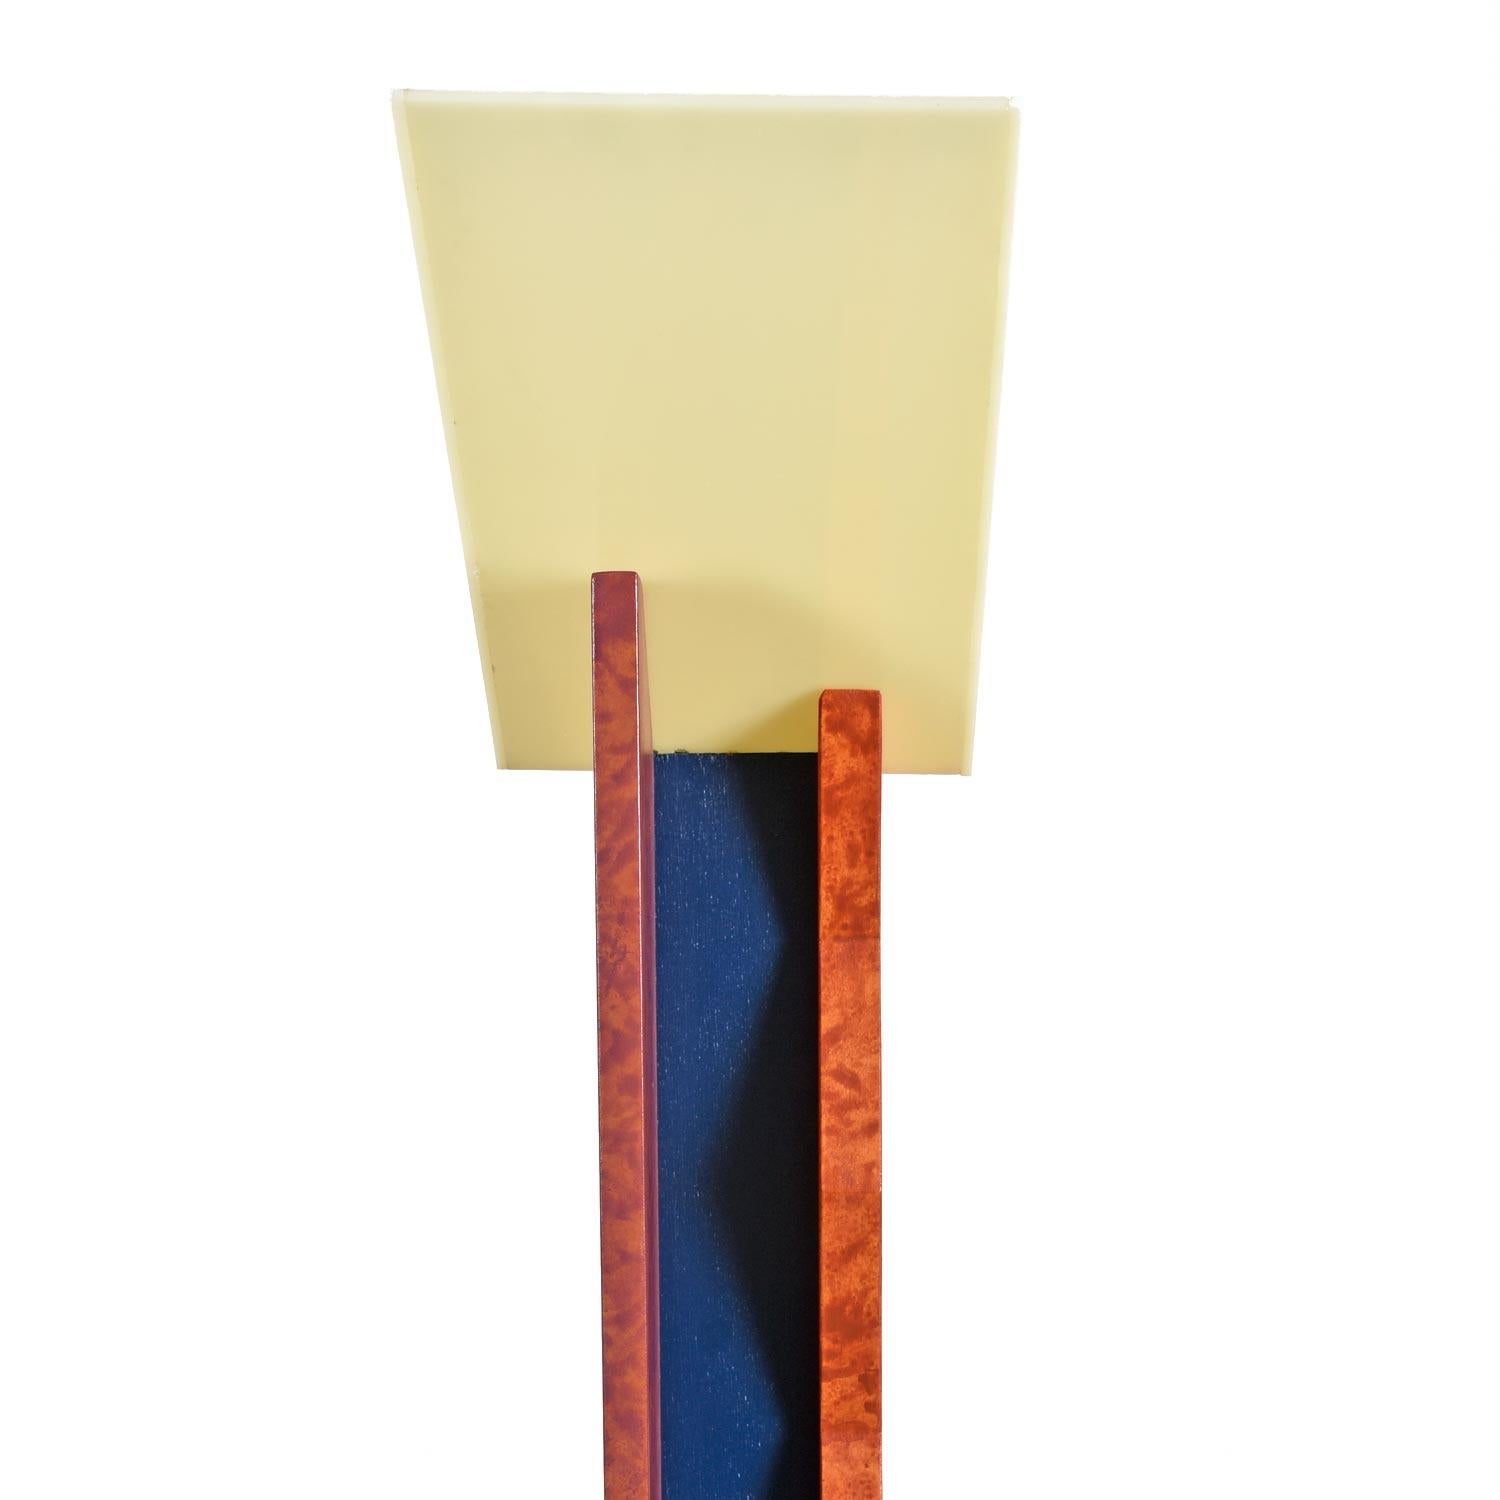 Hardwood Sottsass Style Memphis Floor Lamp by Neophile Limited Edition Furniture 1988 For Sale